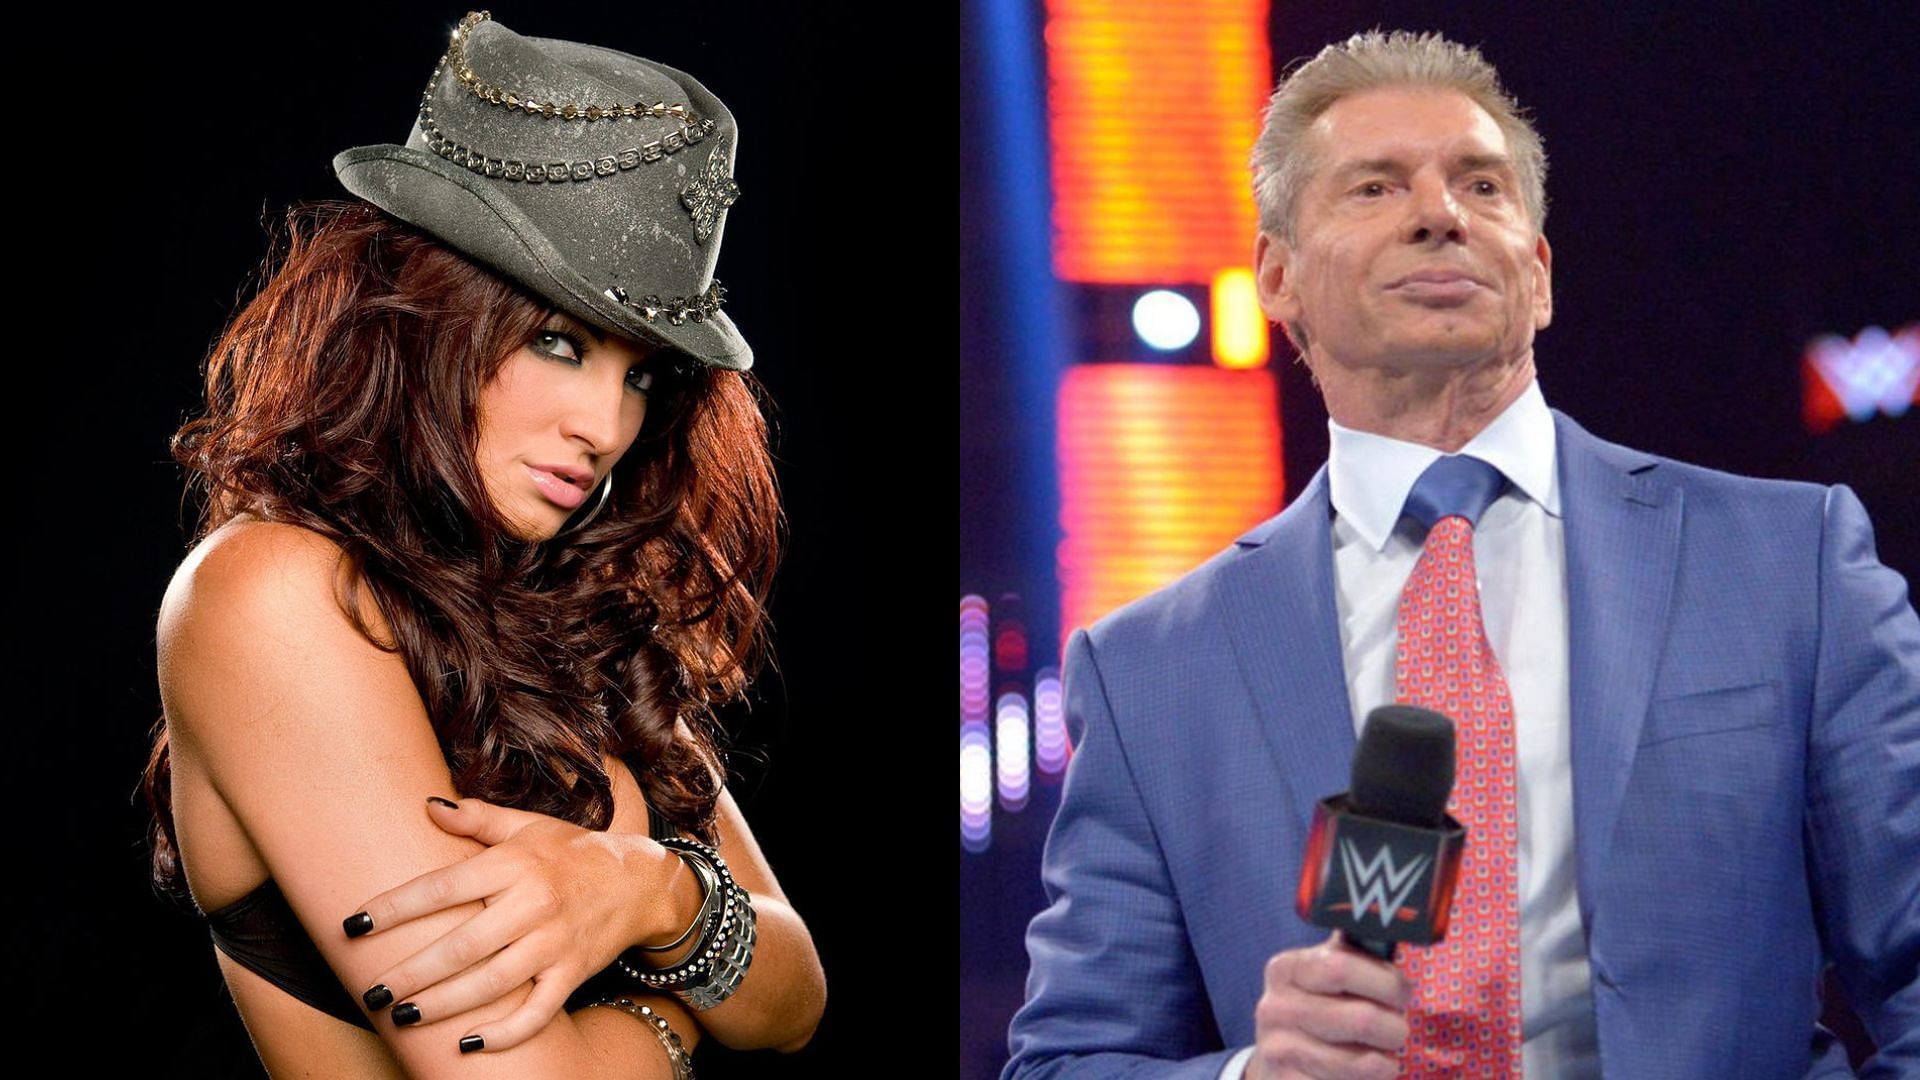 Maria Kanellis (left) and Vince McMahon (right).